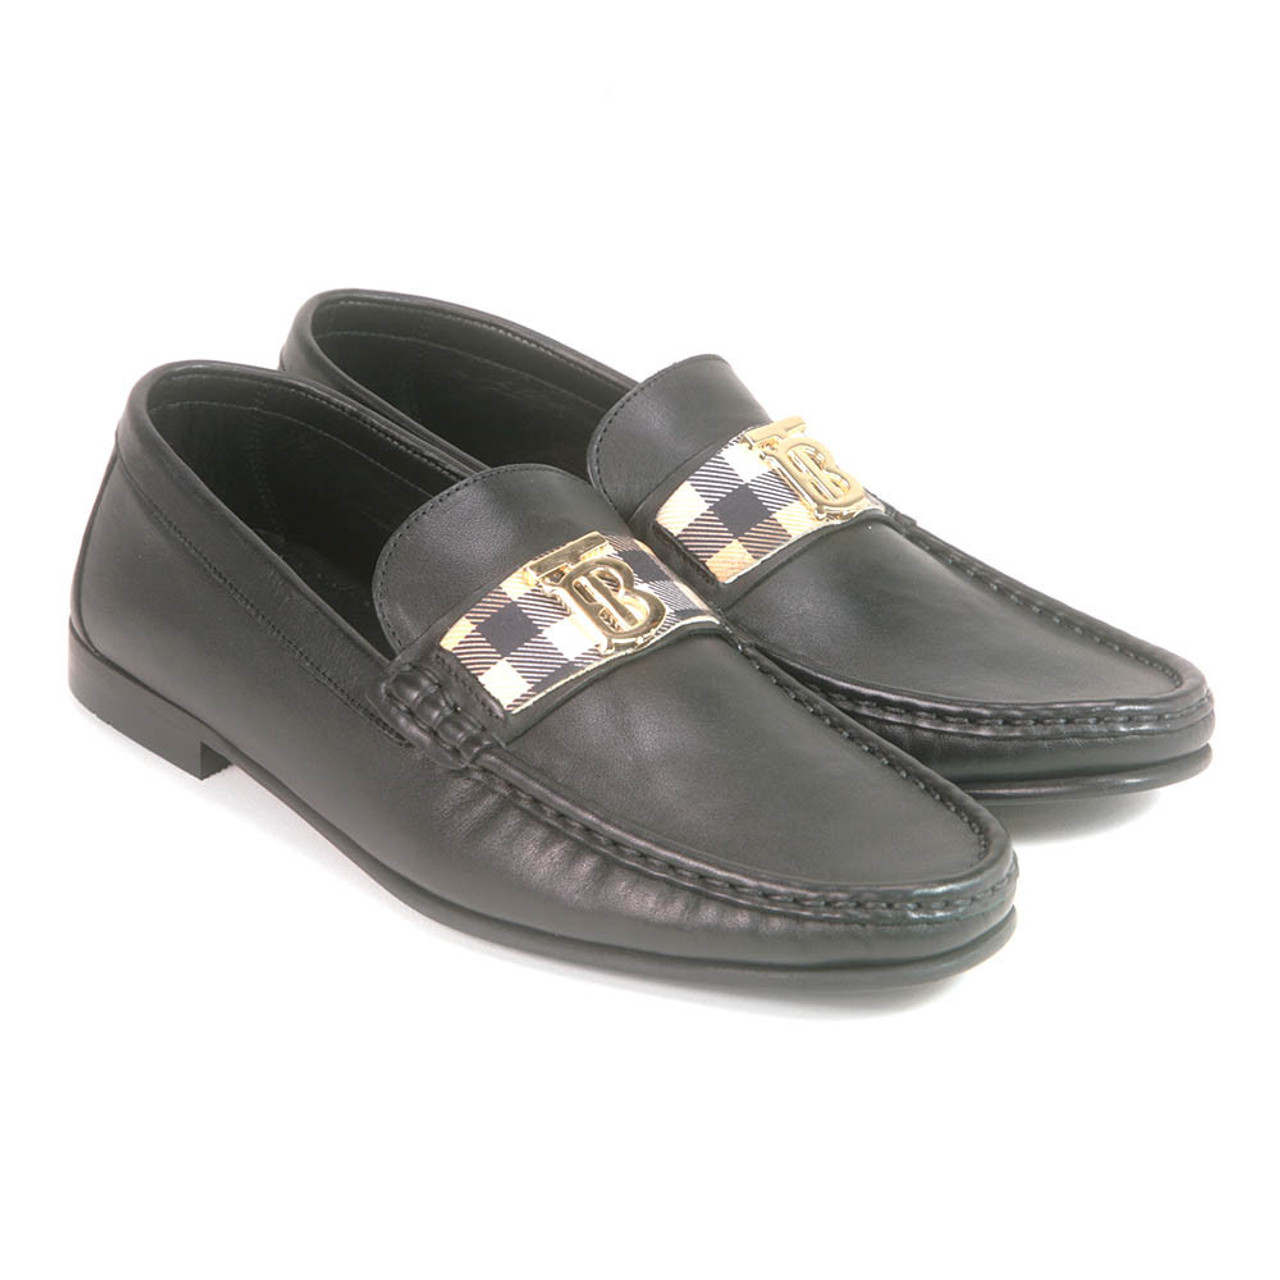 Louis Vuitton Mens Loafers & Slip-Ons, Navy, 10Inventory Confirmation Required